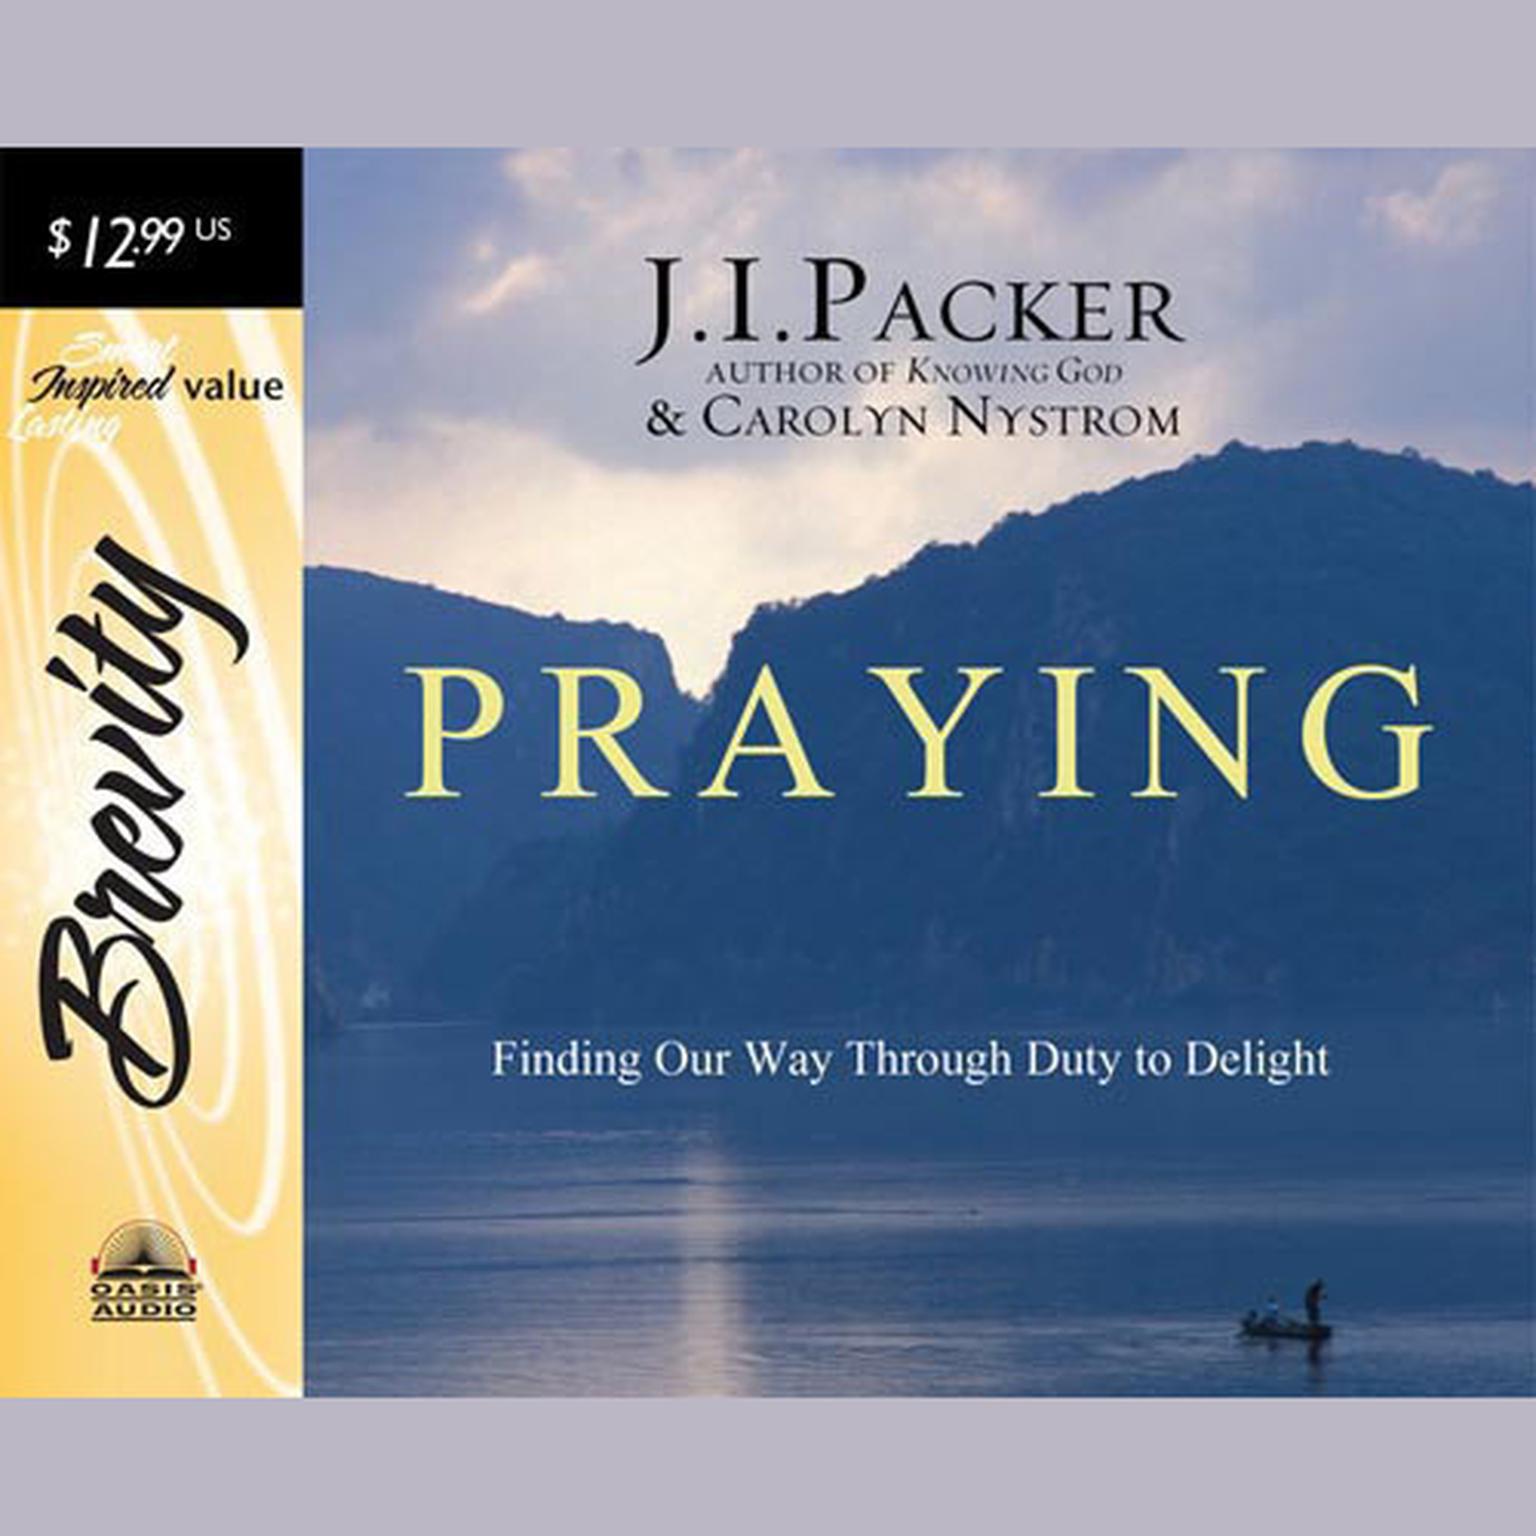 Praying (Abridged): Finding Our Way Through Duty to Delight Audiobook, by J. I. Packer